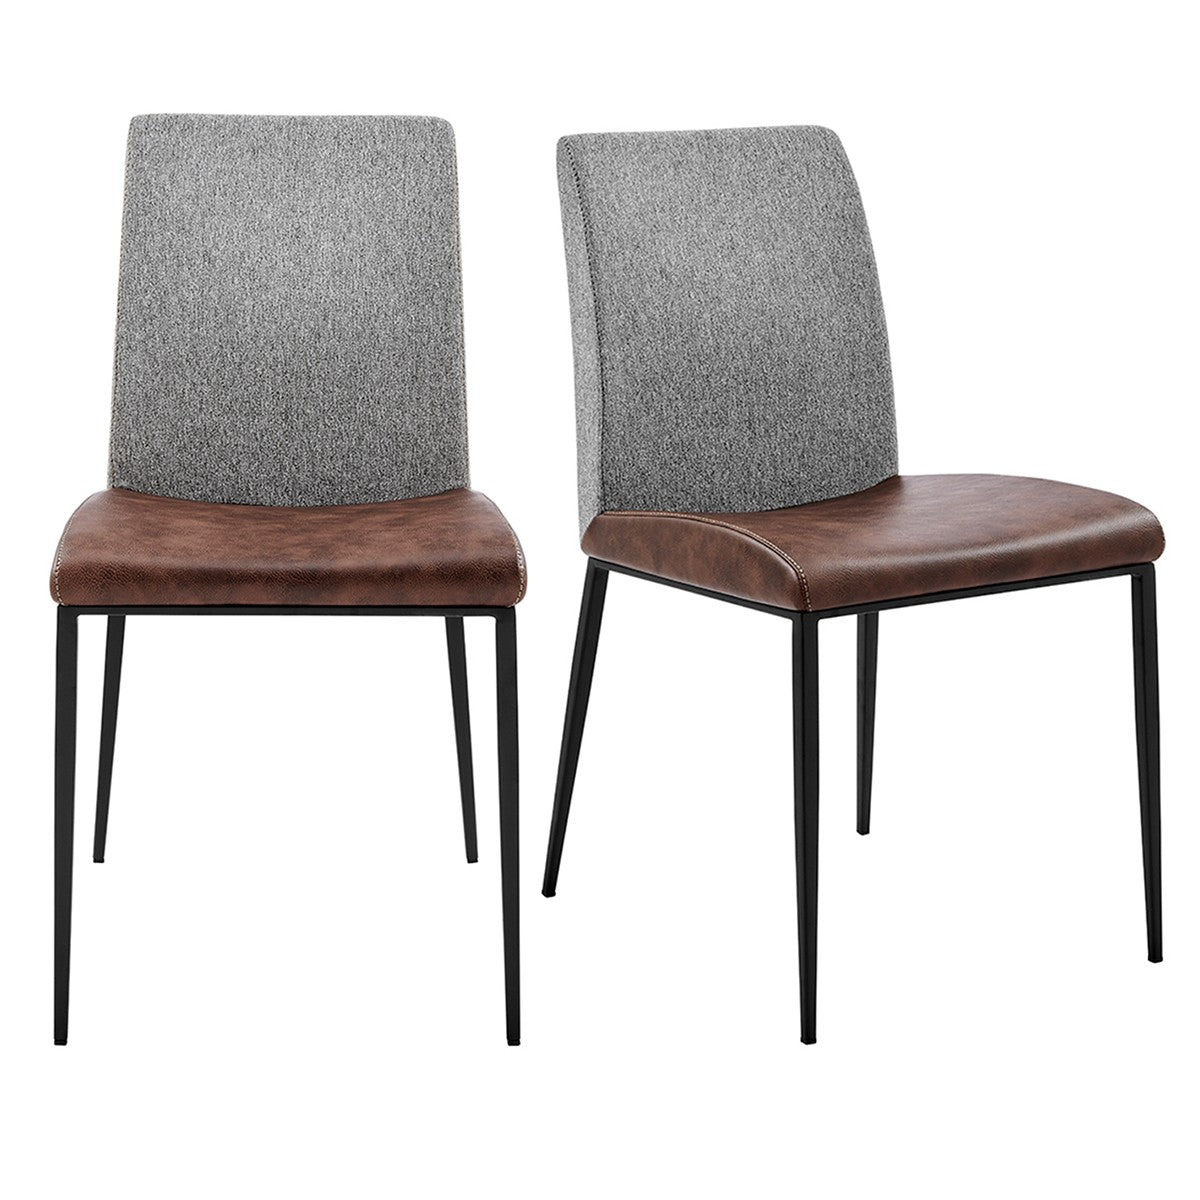 Set of Two Brown and Light Gray Stainless Steel Chairs